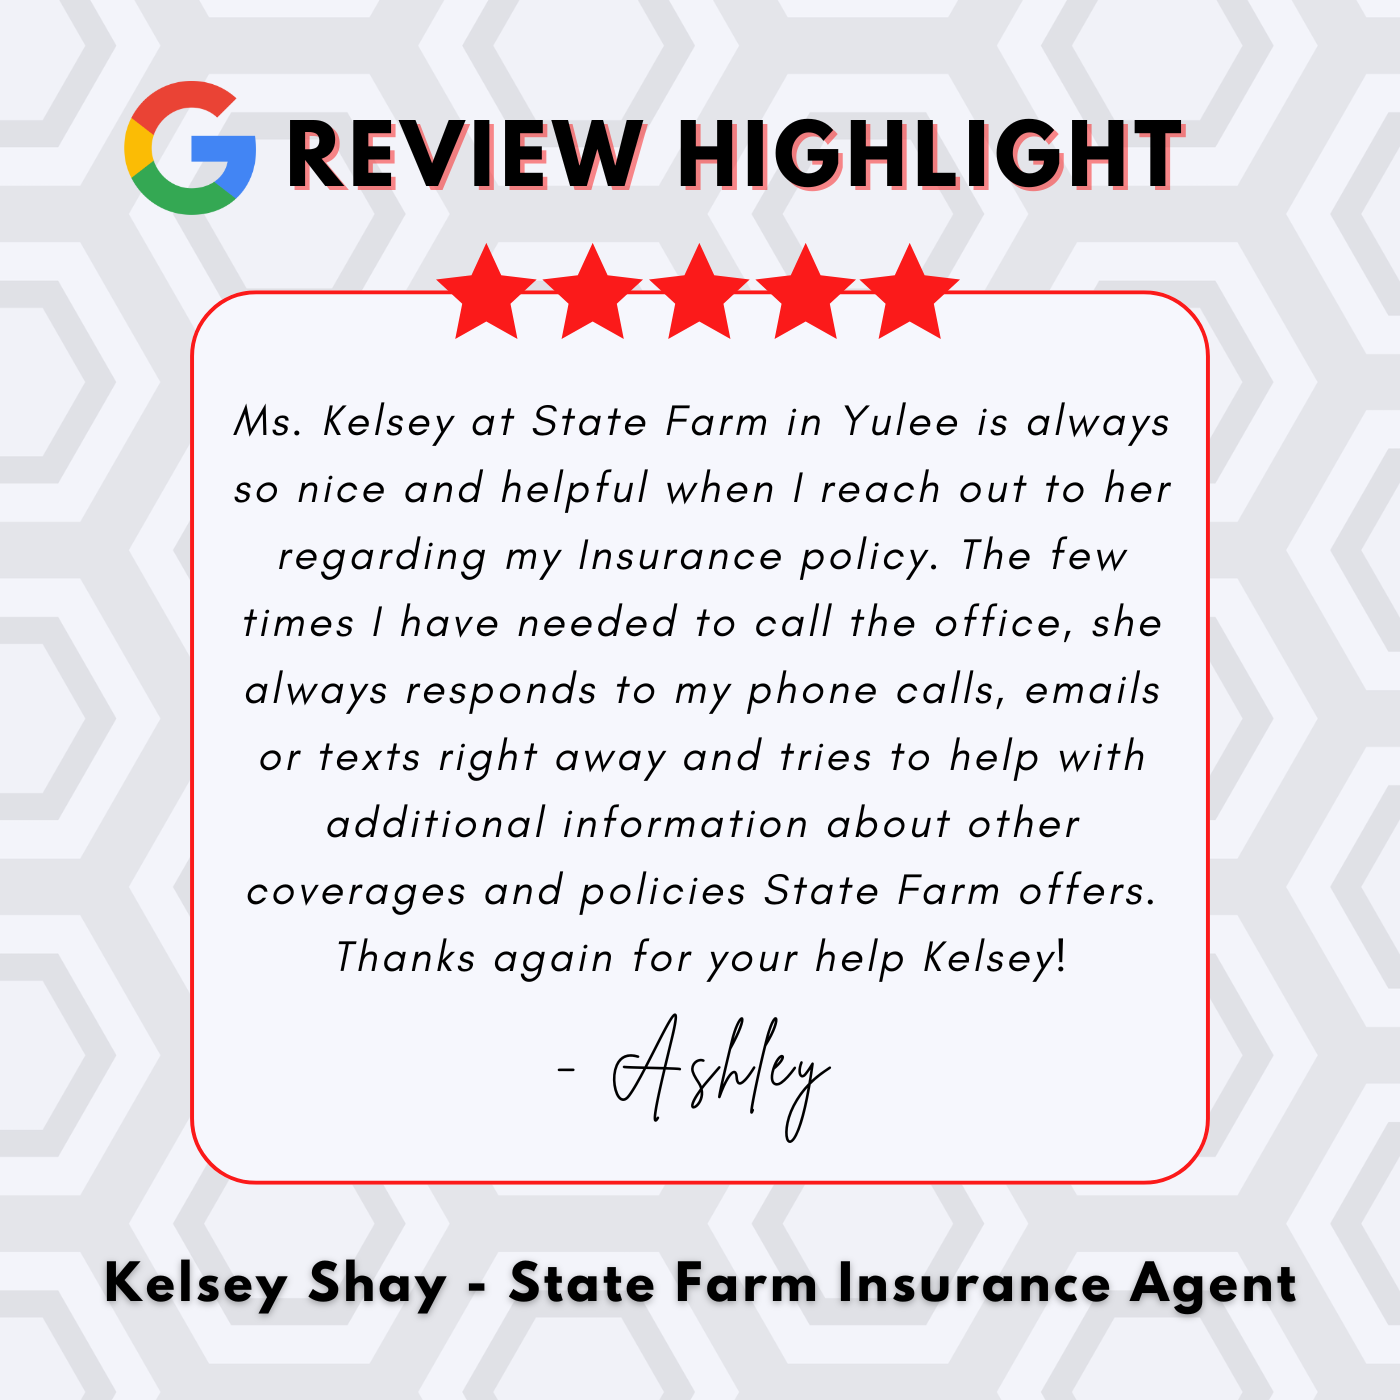 Thank you for the 5-star review!